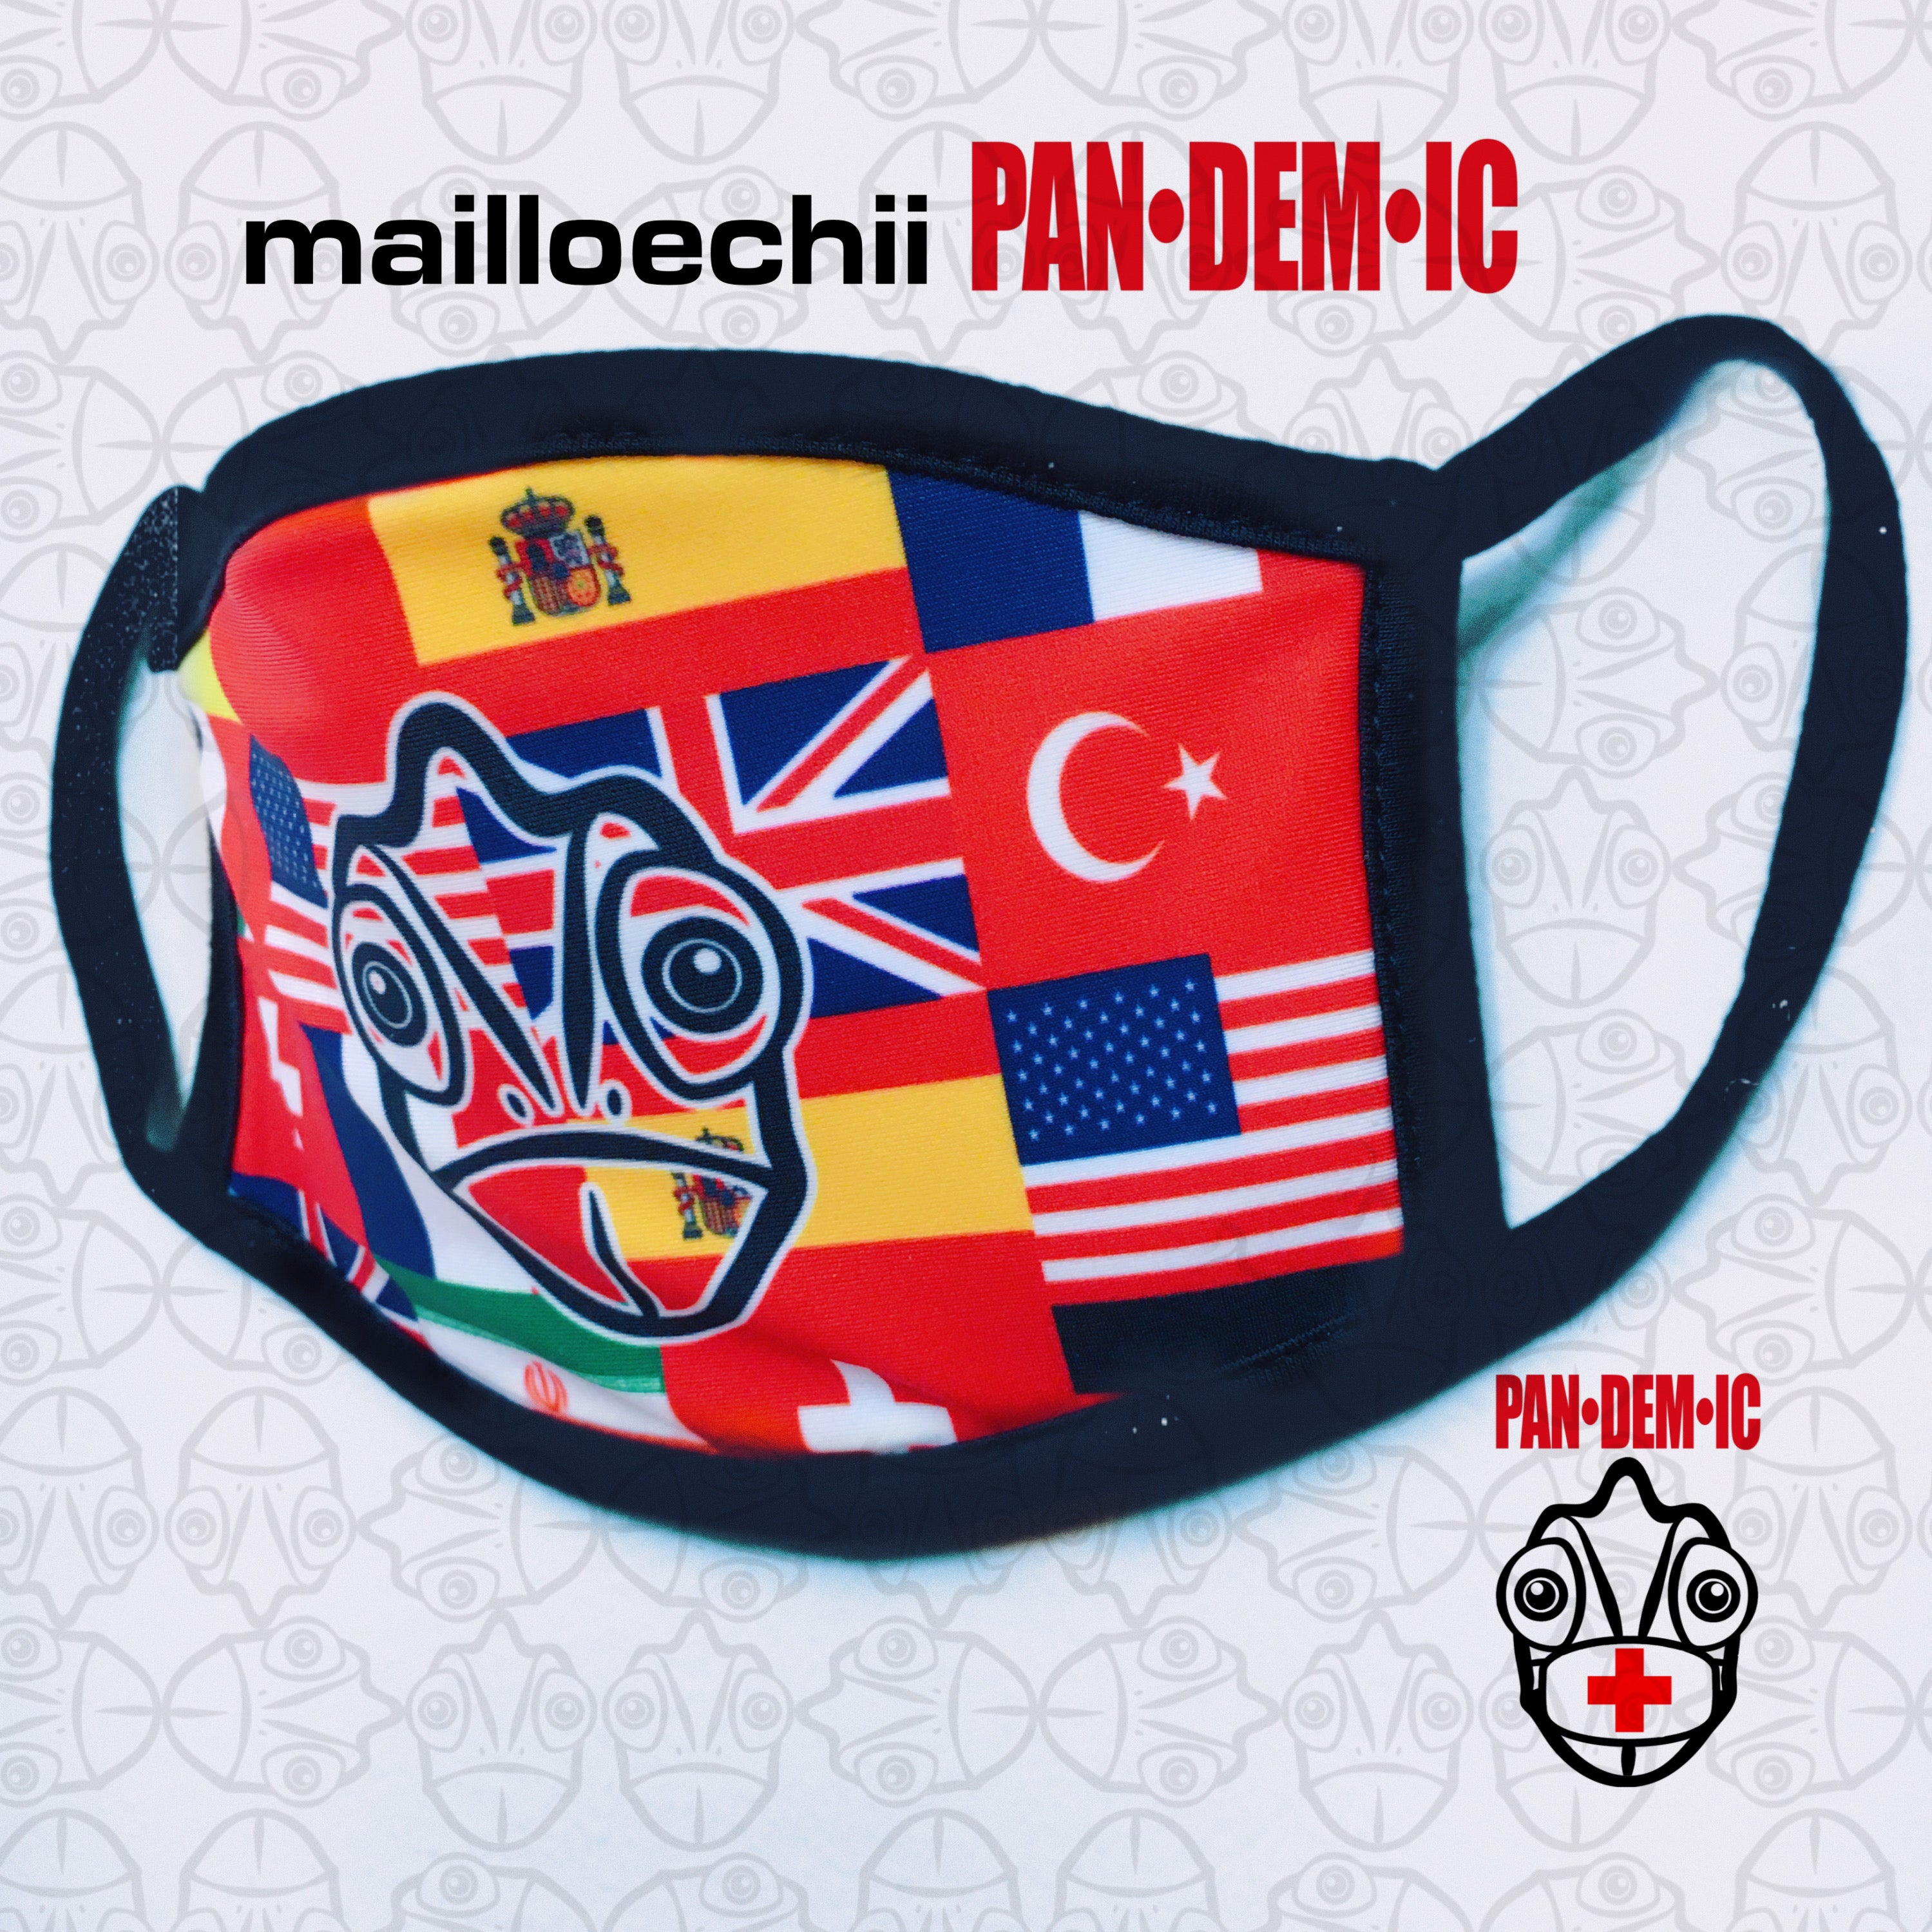 PANDEMIC MASK AND GLOVES SET COMBO by mailloechii